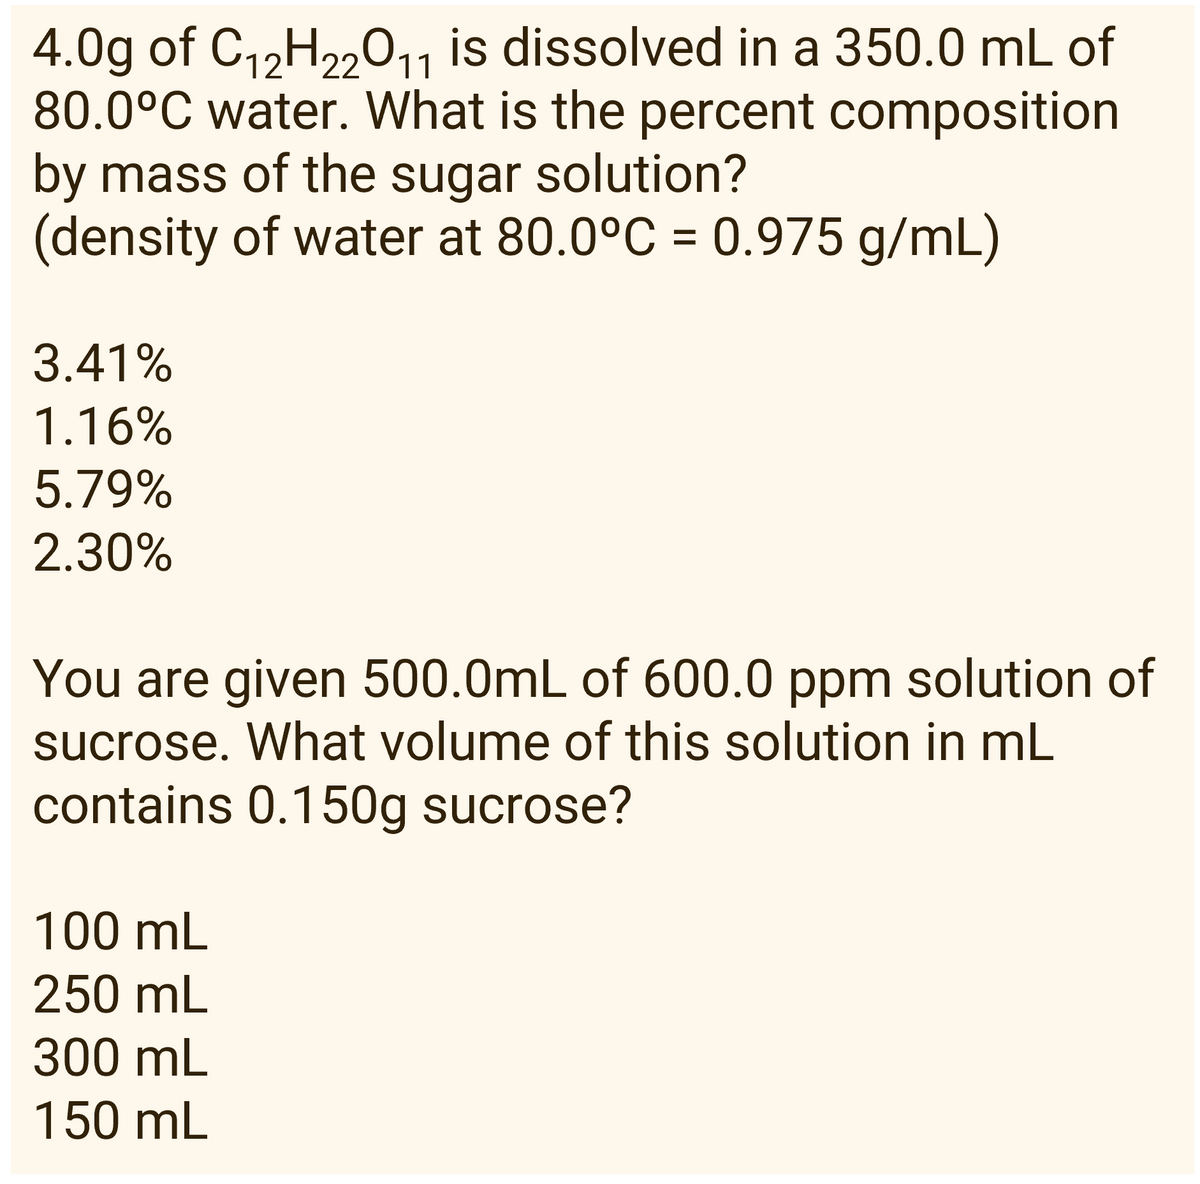 11
4.0g of C₁2H₂2O1₁ is dissolved in a 350.0 mL of
80.0°C water. What is the percent composition
by mass of the sugar solution?
(density of water at 80.0°C = 0.975 g/mL)
3.41%
1.16%
5.79%
2.30%
You are given 500.0mL of 600.0 ppm solution of
sucrose. What volume of this solution in mL
contains 0.150g sucrose?
100 mL
250 mL
300 mL
150 mL